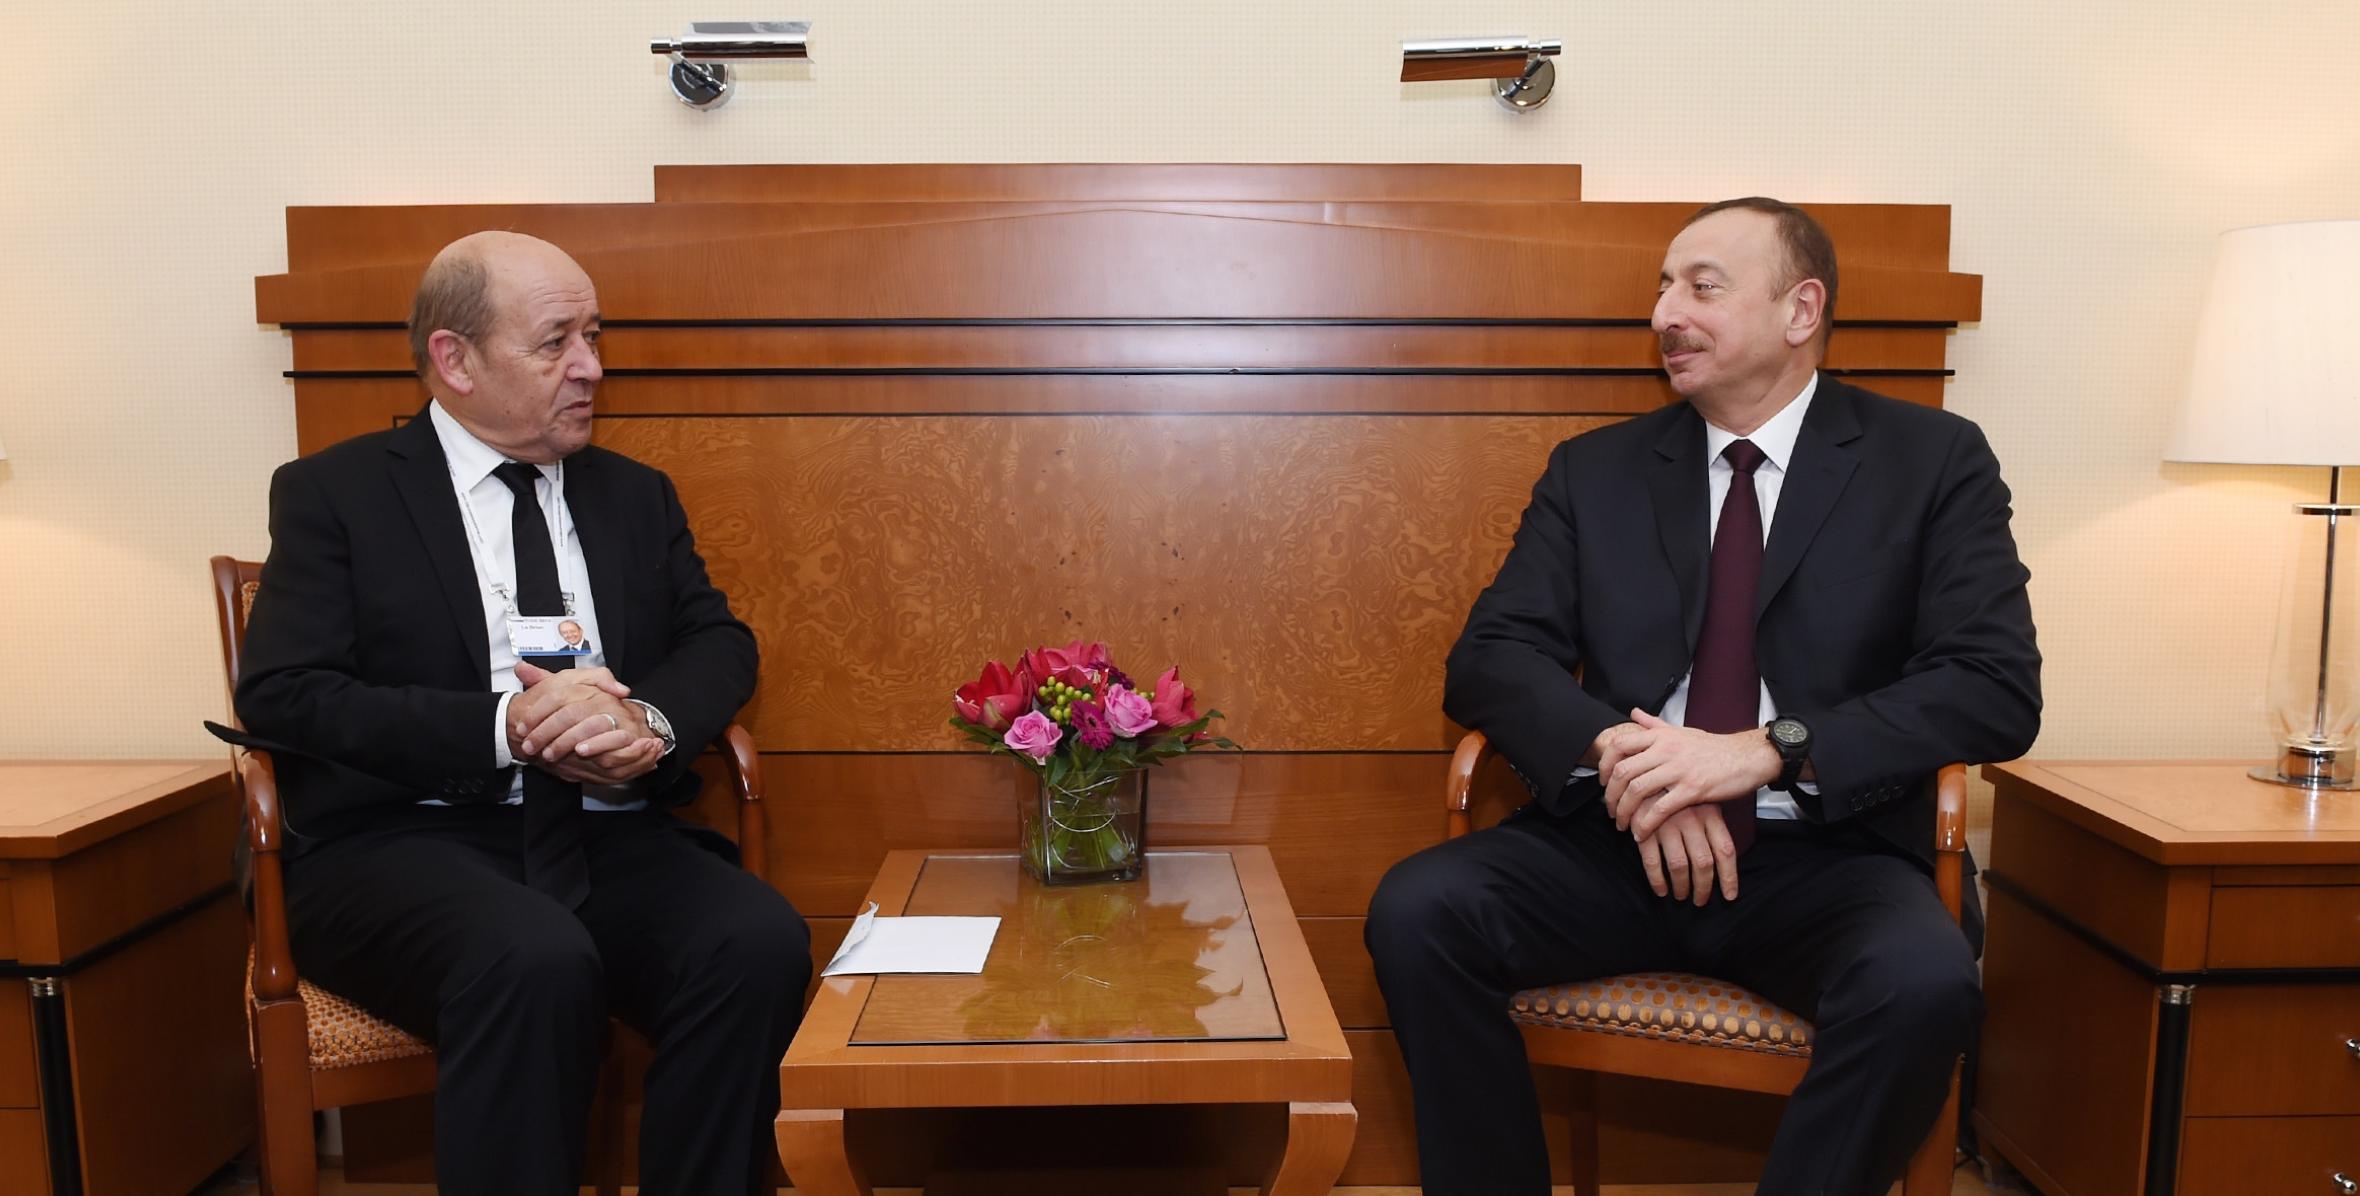 Ilham Aliyev met with French Defence Minister Jean-Yves Le Drian in Munich